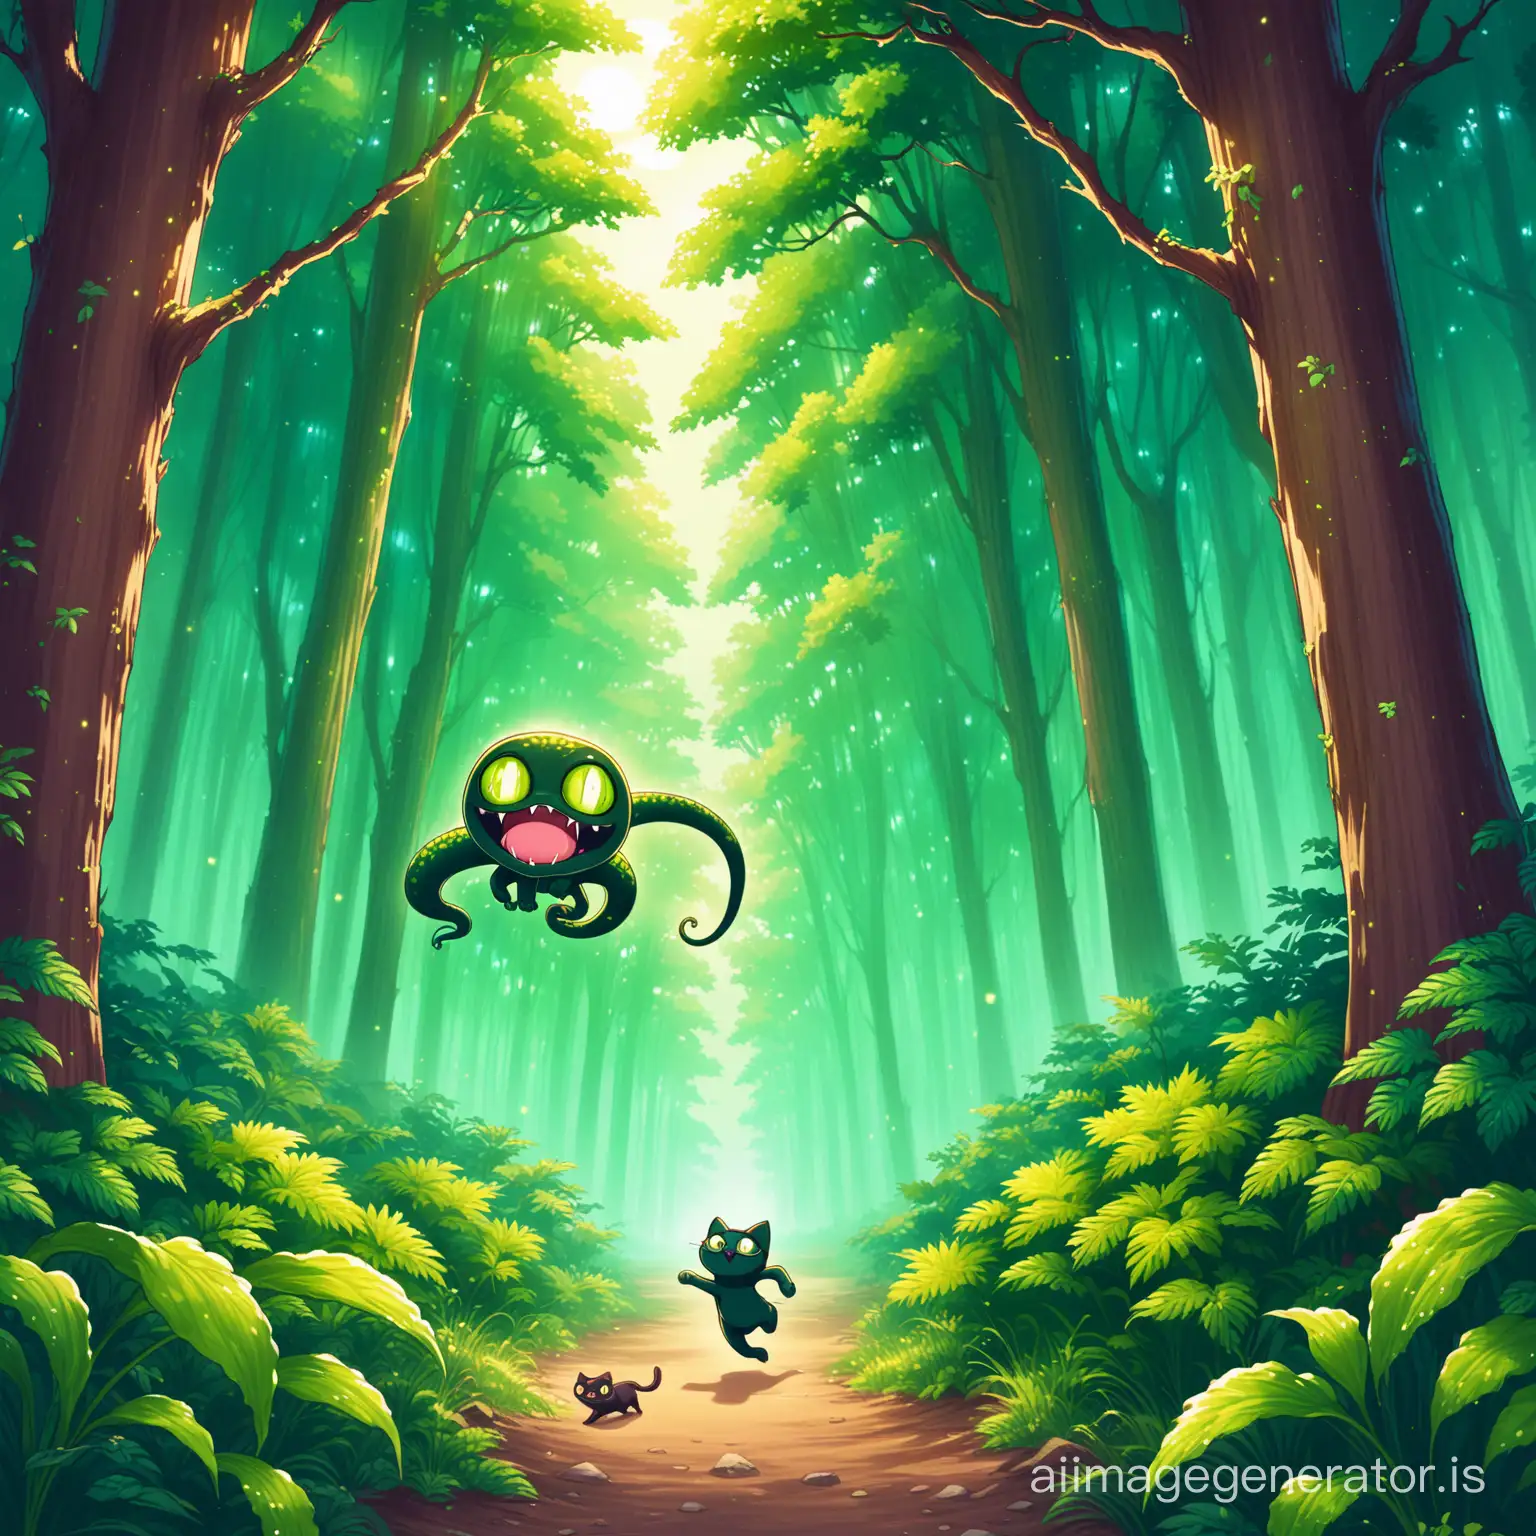 a 3 eyed snake alien chasing a cat in the forest